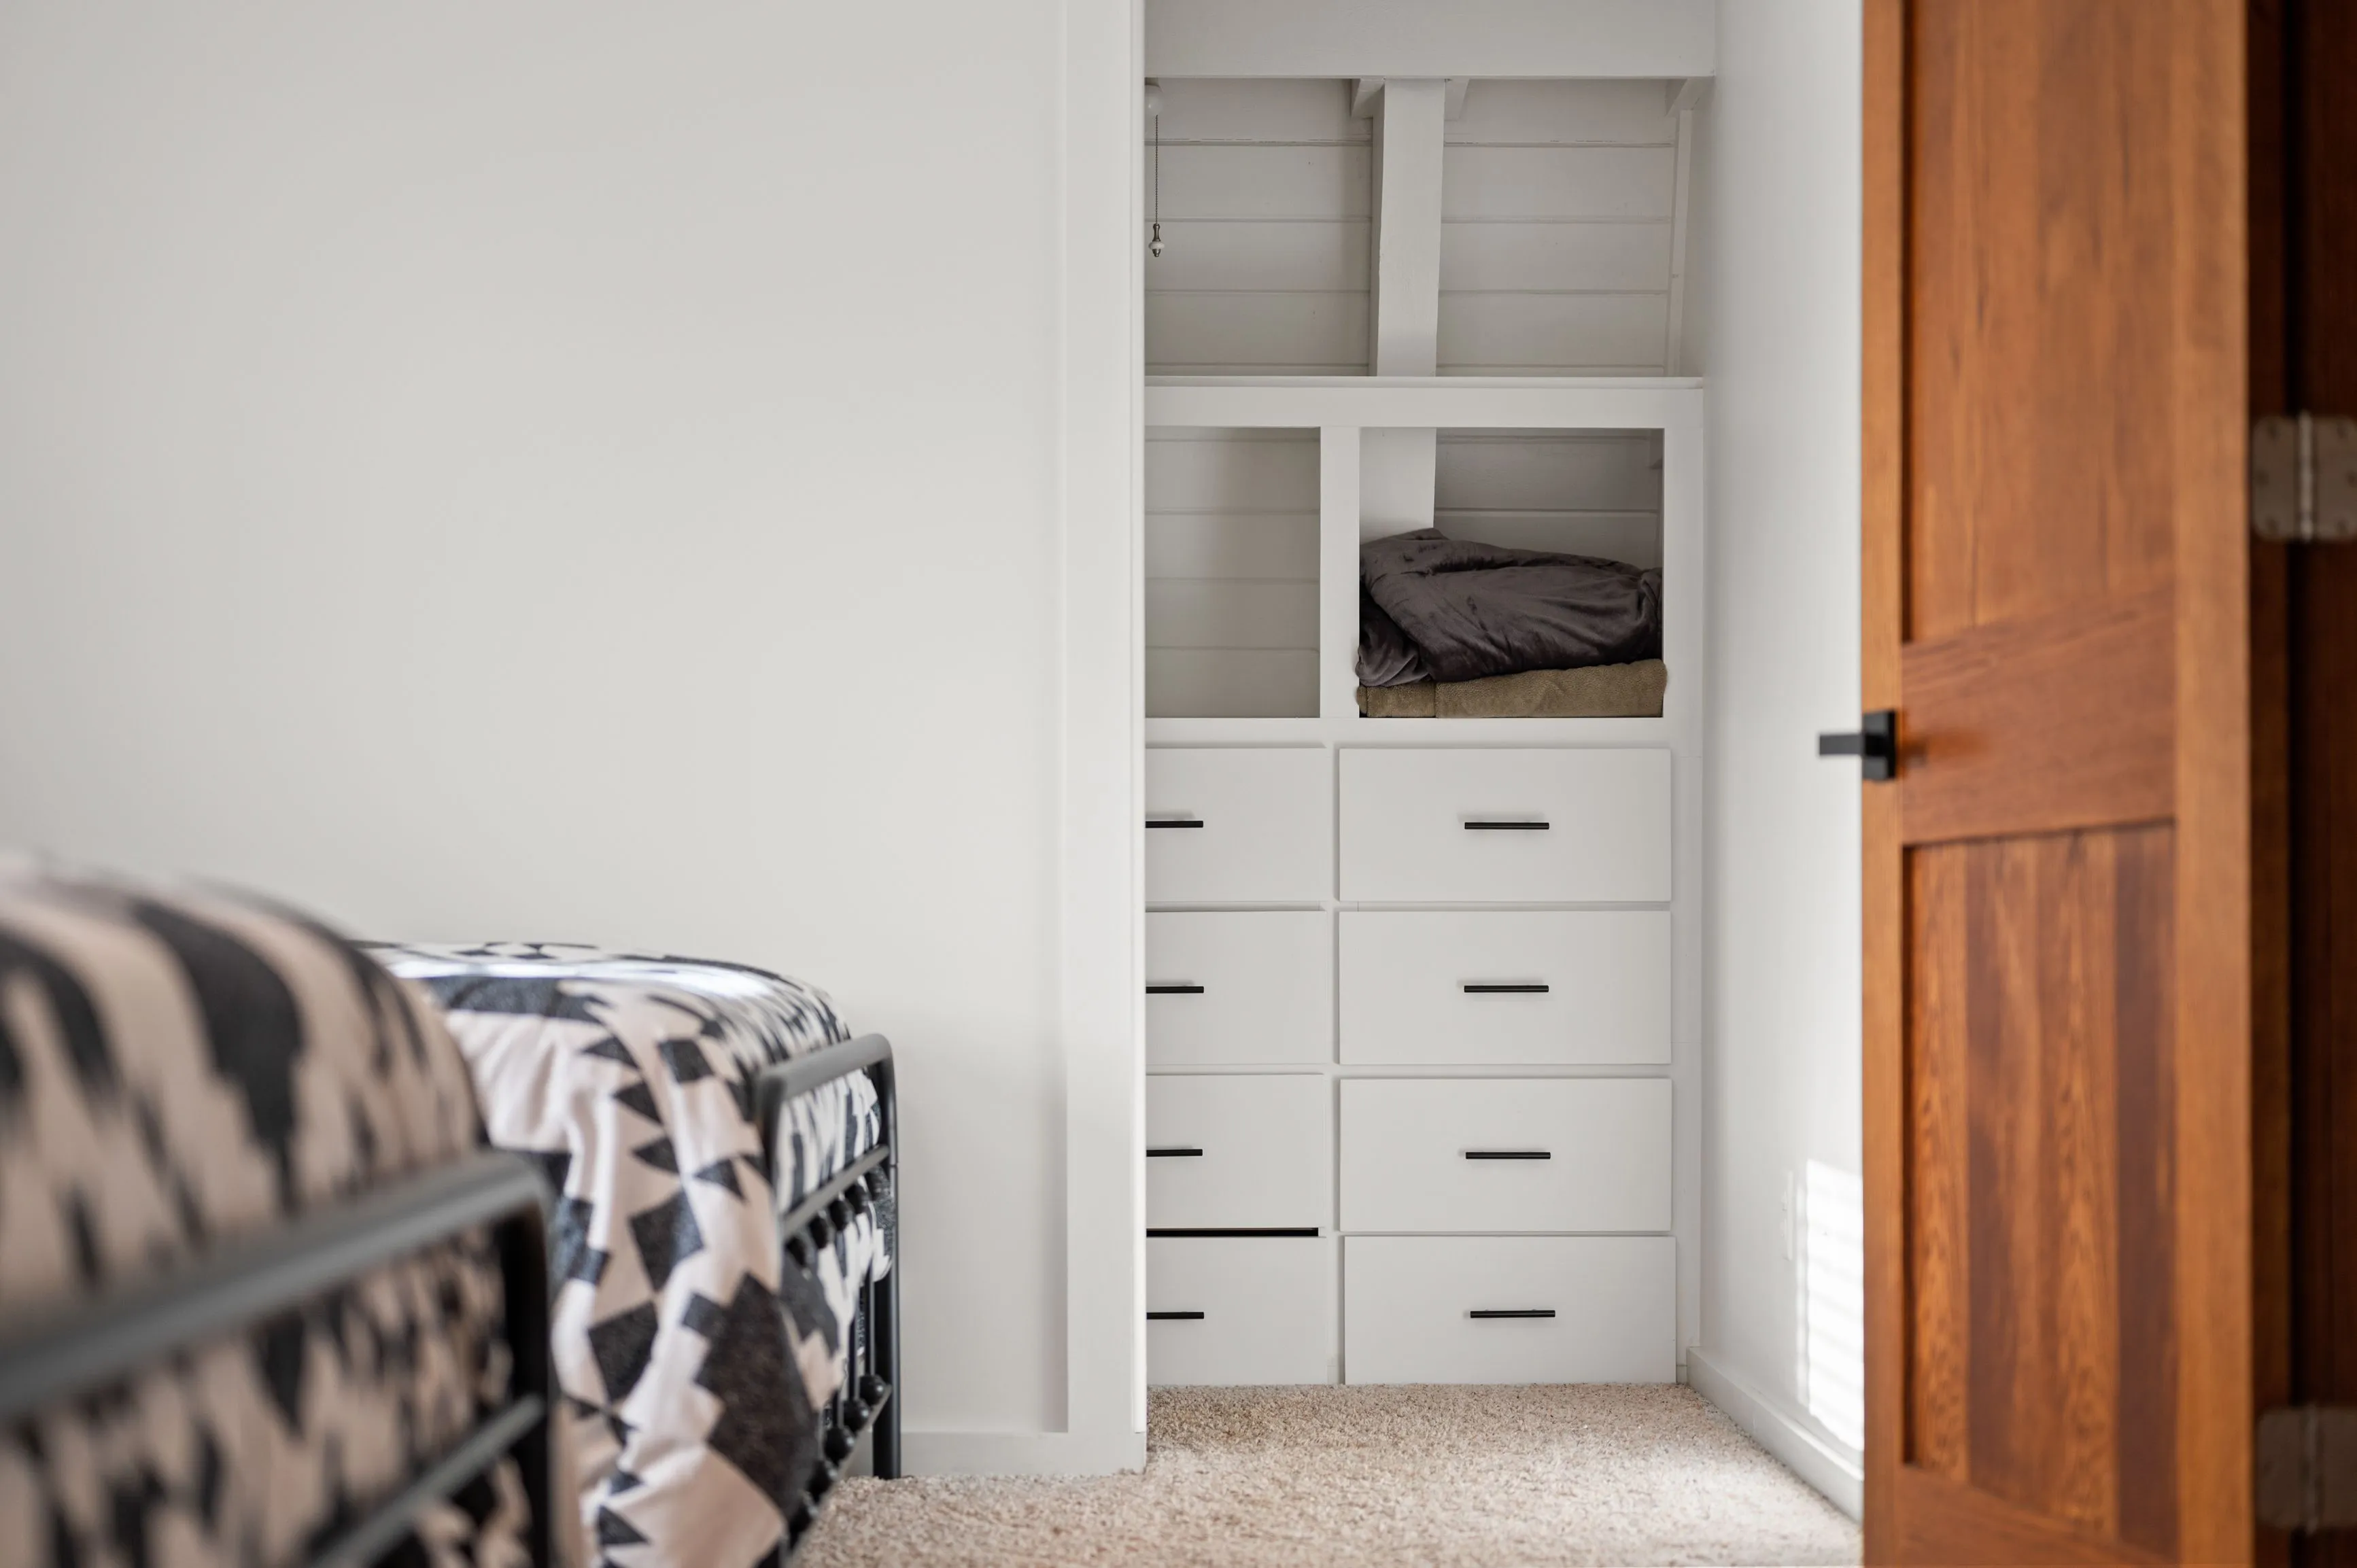 A modern bedroom with an open closet featuring built-in white drawers and shelves with a folded blanket, partial view of a patterned bedspread, and a wooden door ajar to the right.